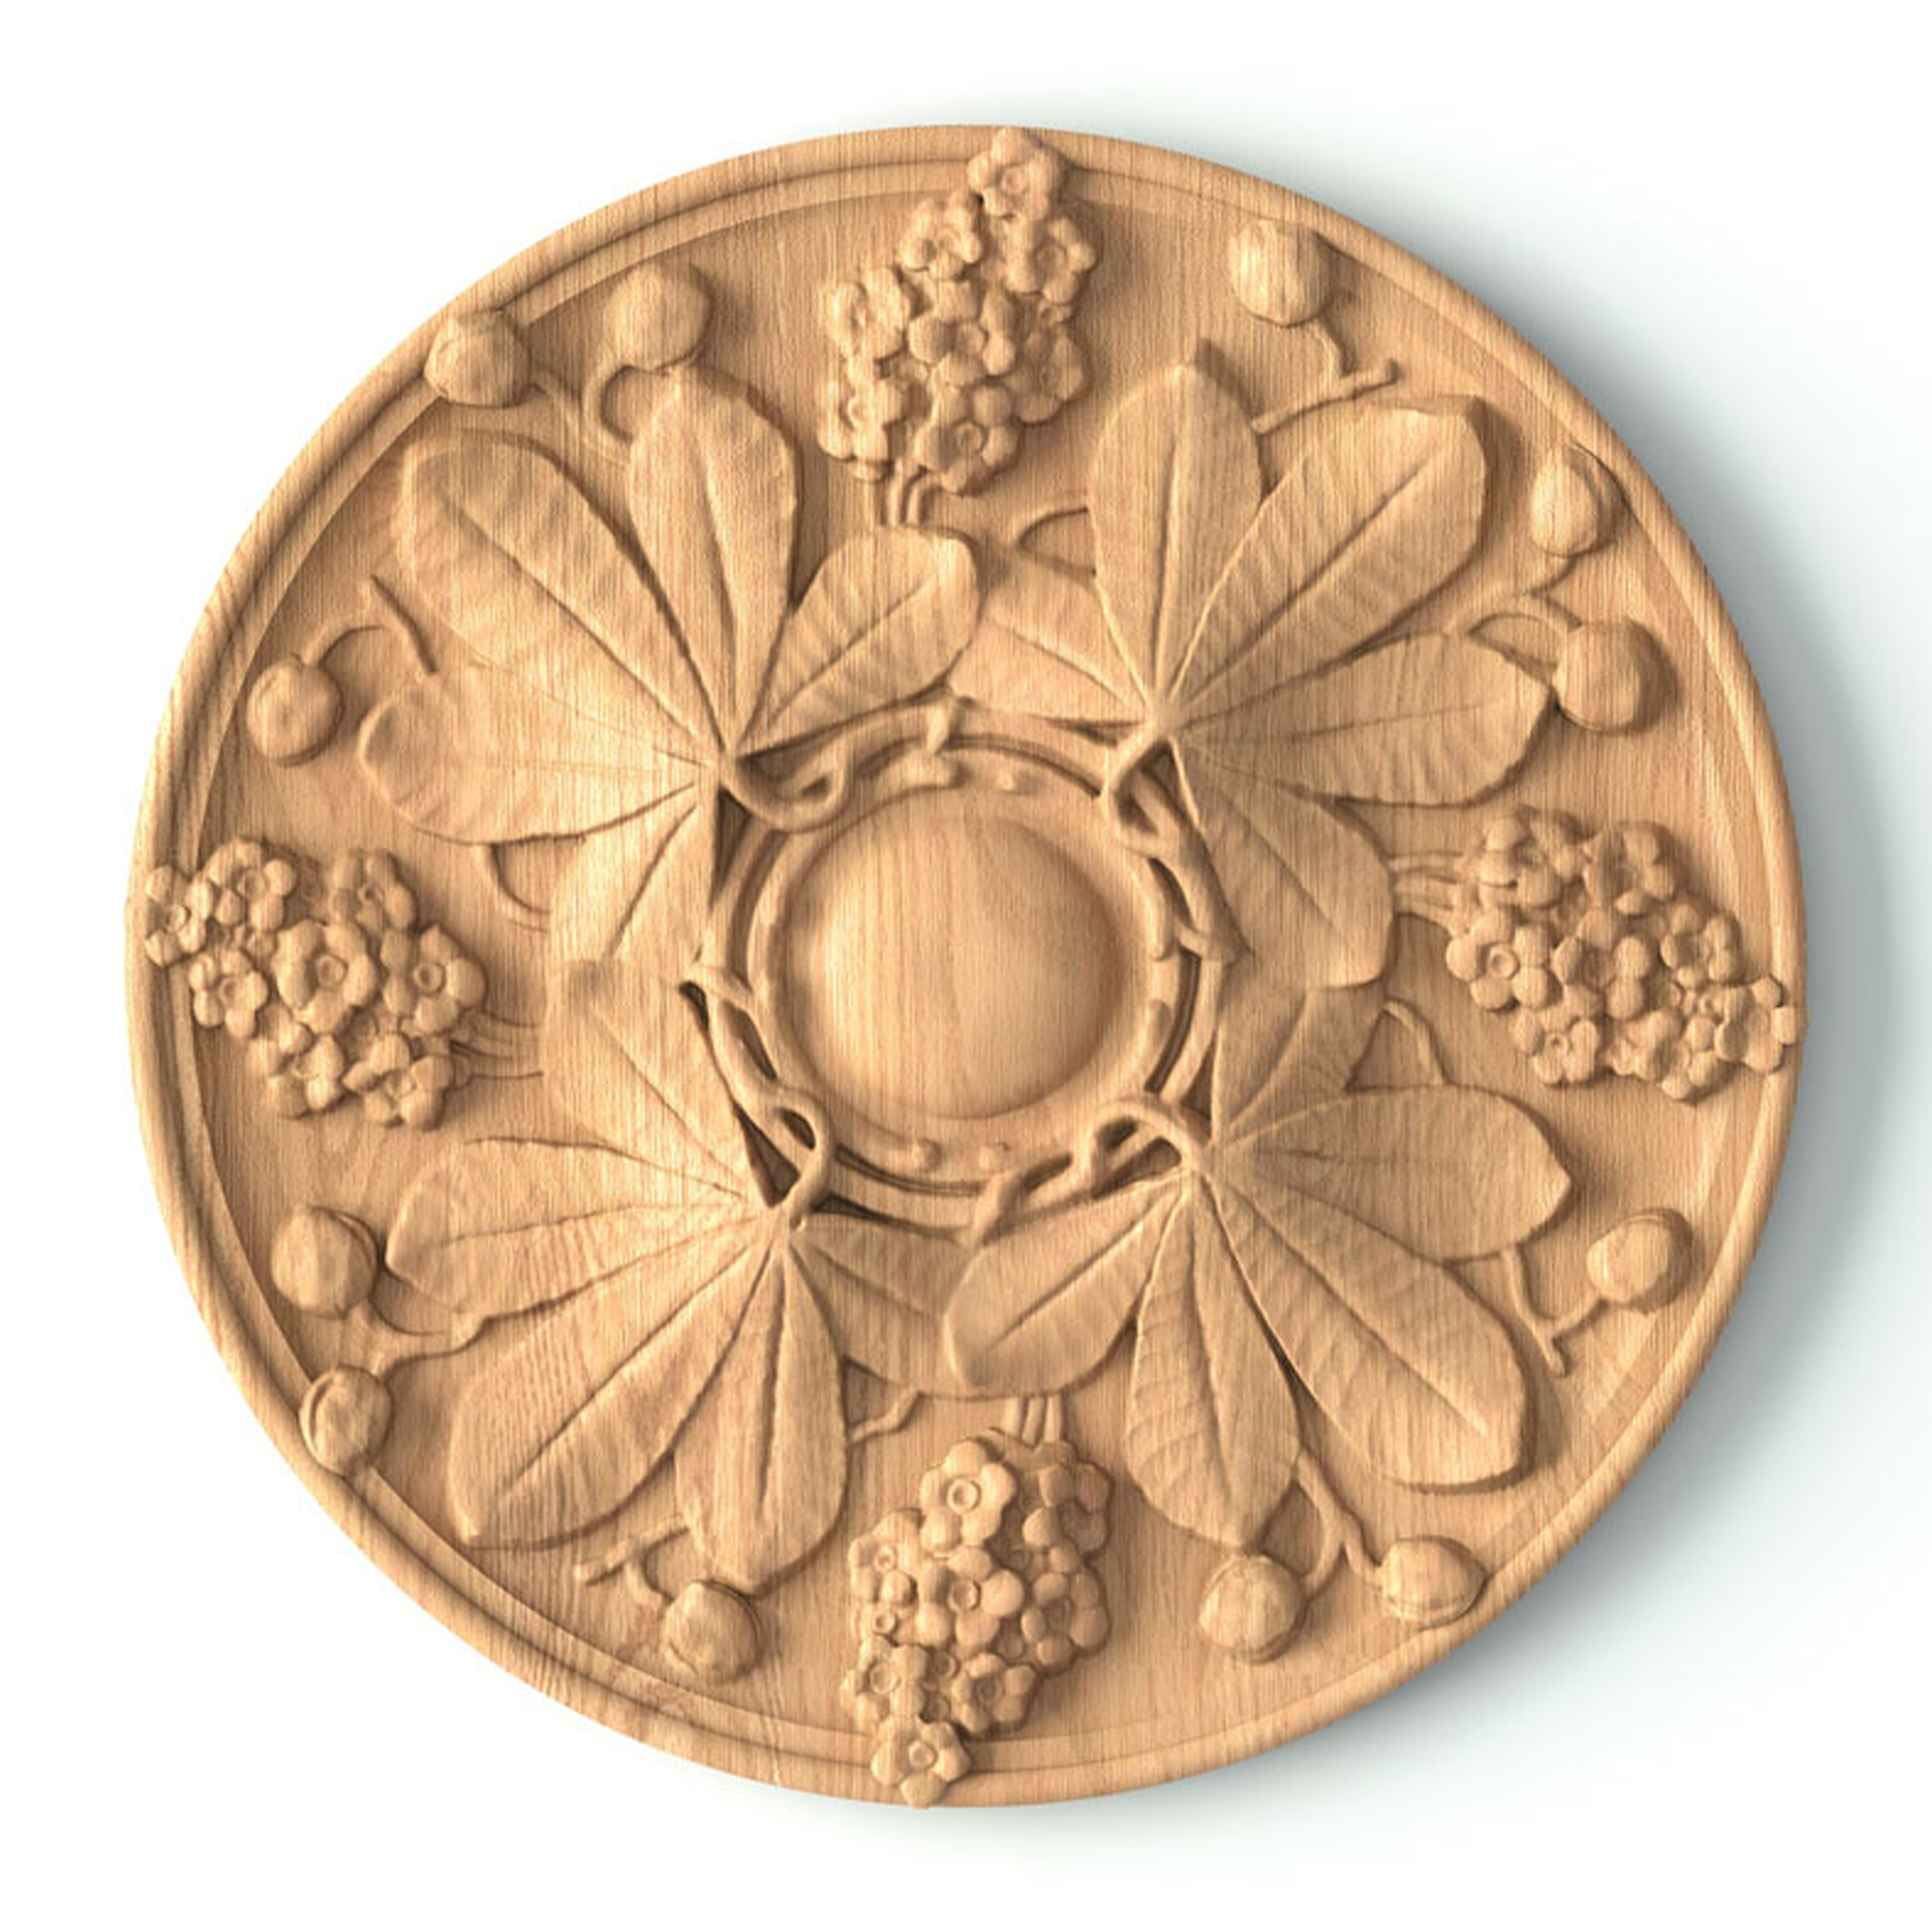 1 Piece Wood Carving Rosette Applique Shabby Chic Wood -  Portugal